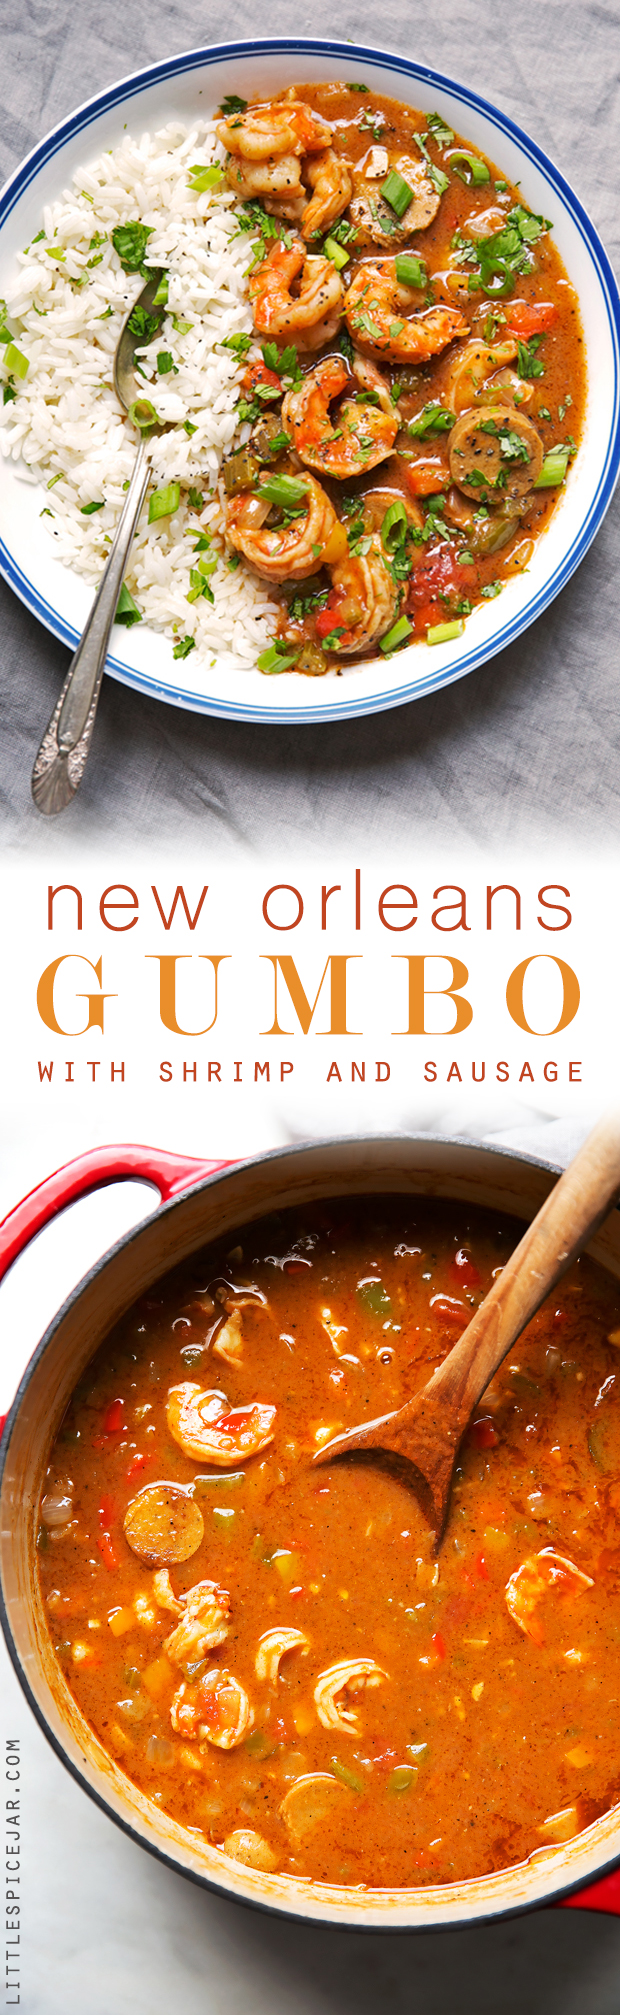 New Orleans Gumbo With Shrimp And Sausage Recipe Little Spice Jar,Chestnut Puree Recipe